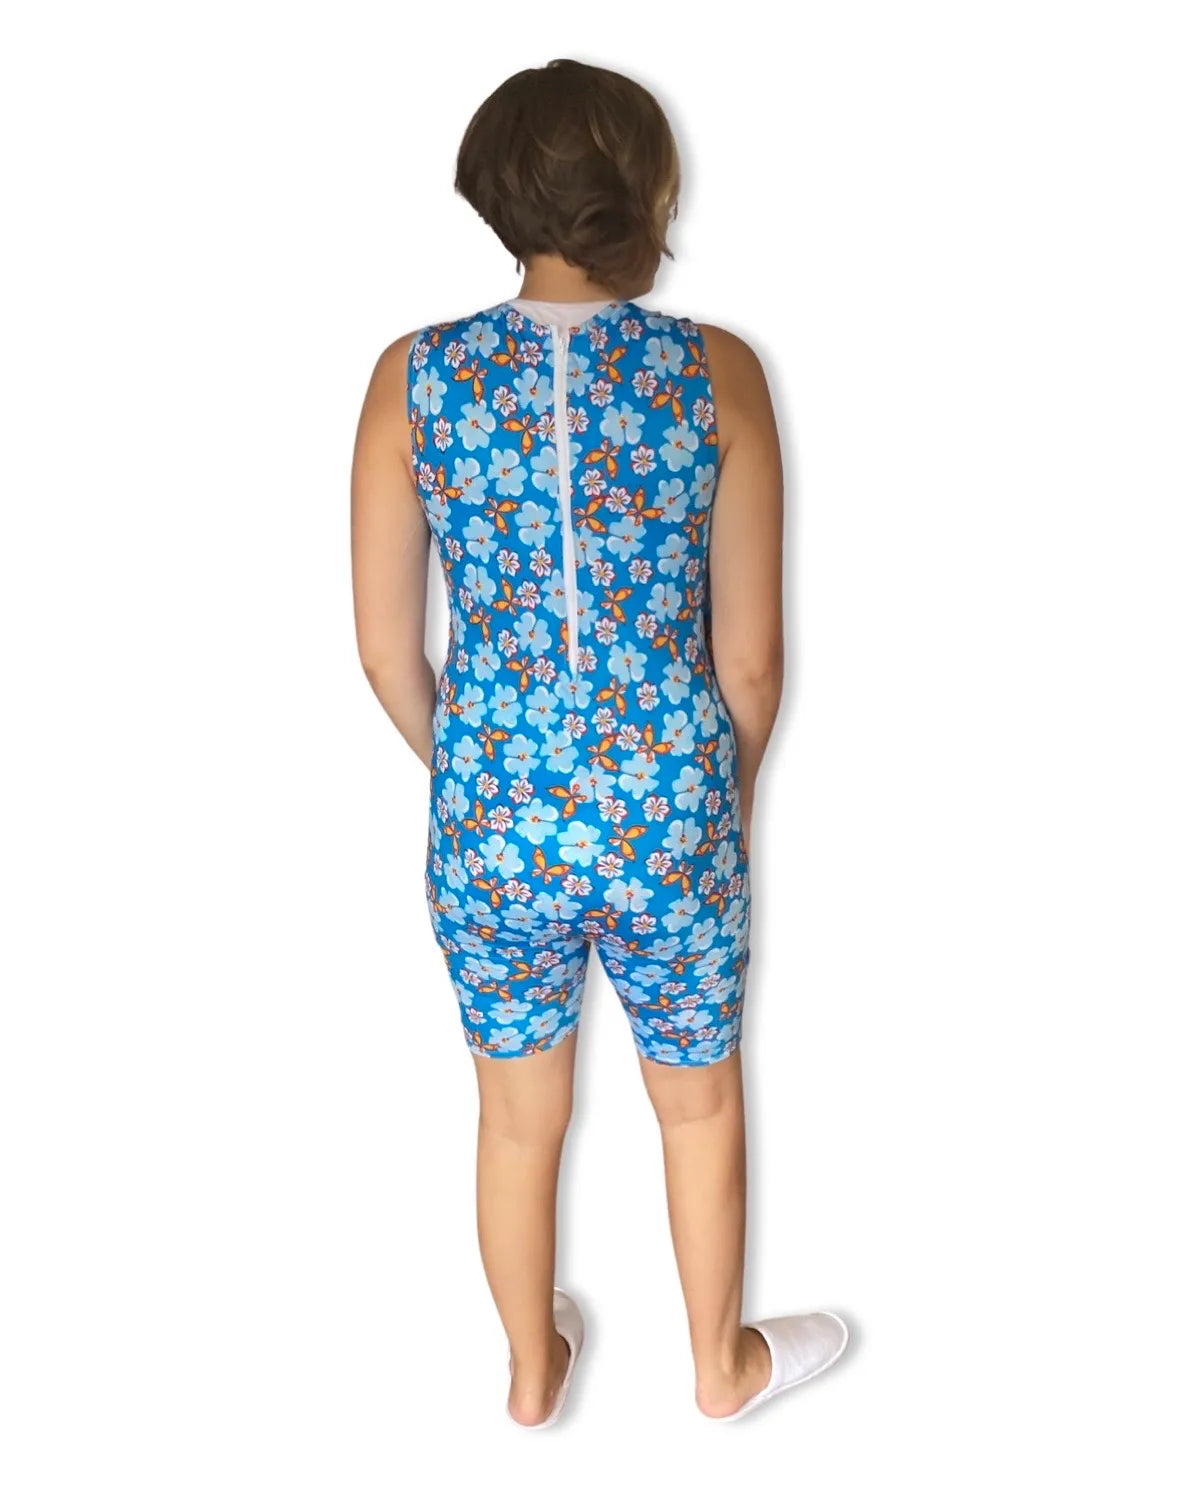 A female in a blue floral print swimsuit, designed for special needs individuals